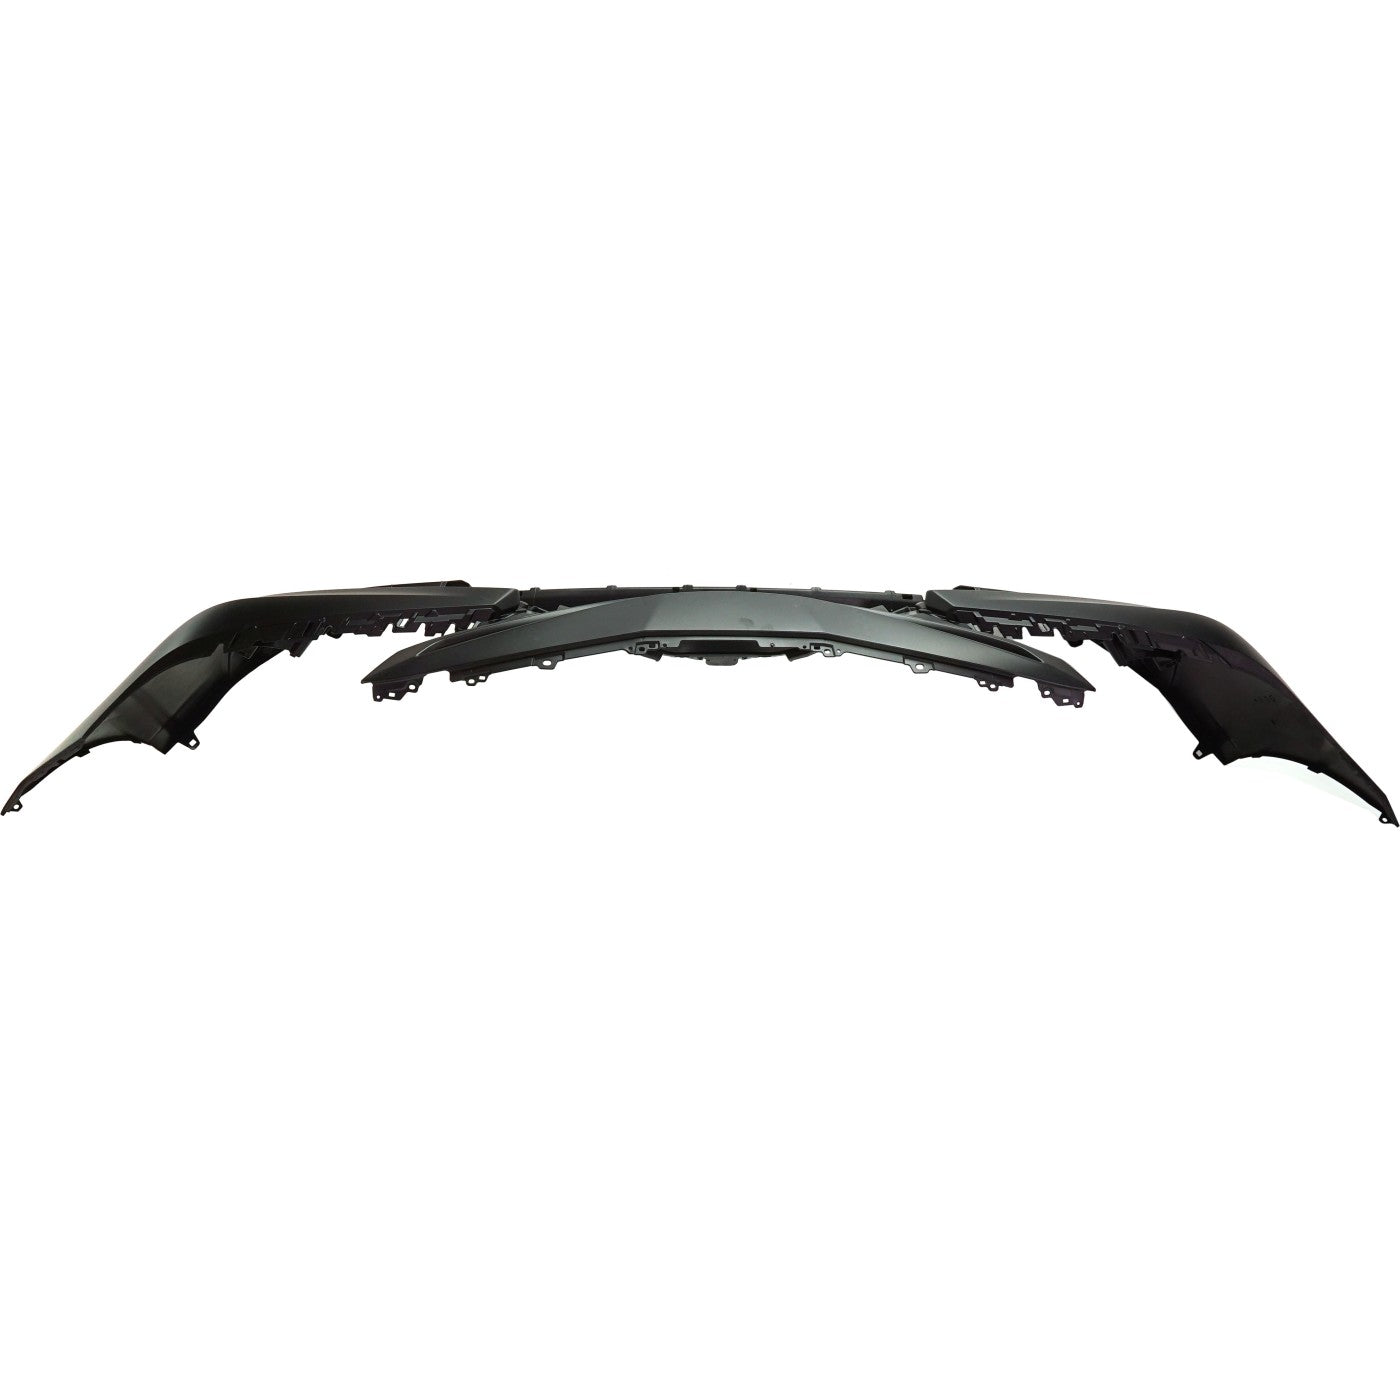 Toyota Camry 2018 - 2020 Front Bumper Cover 18 - 20 TO1000441 Bumper-King